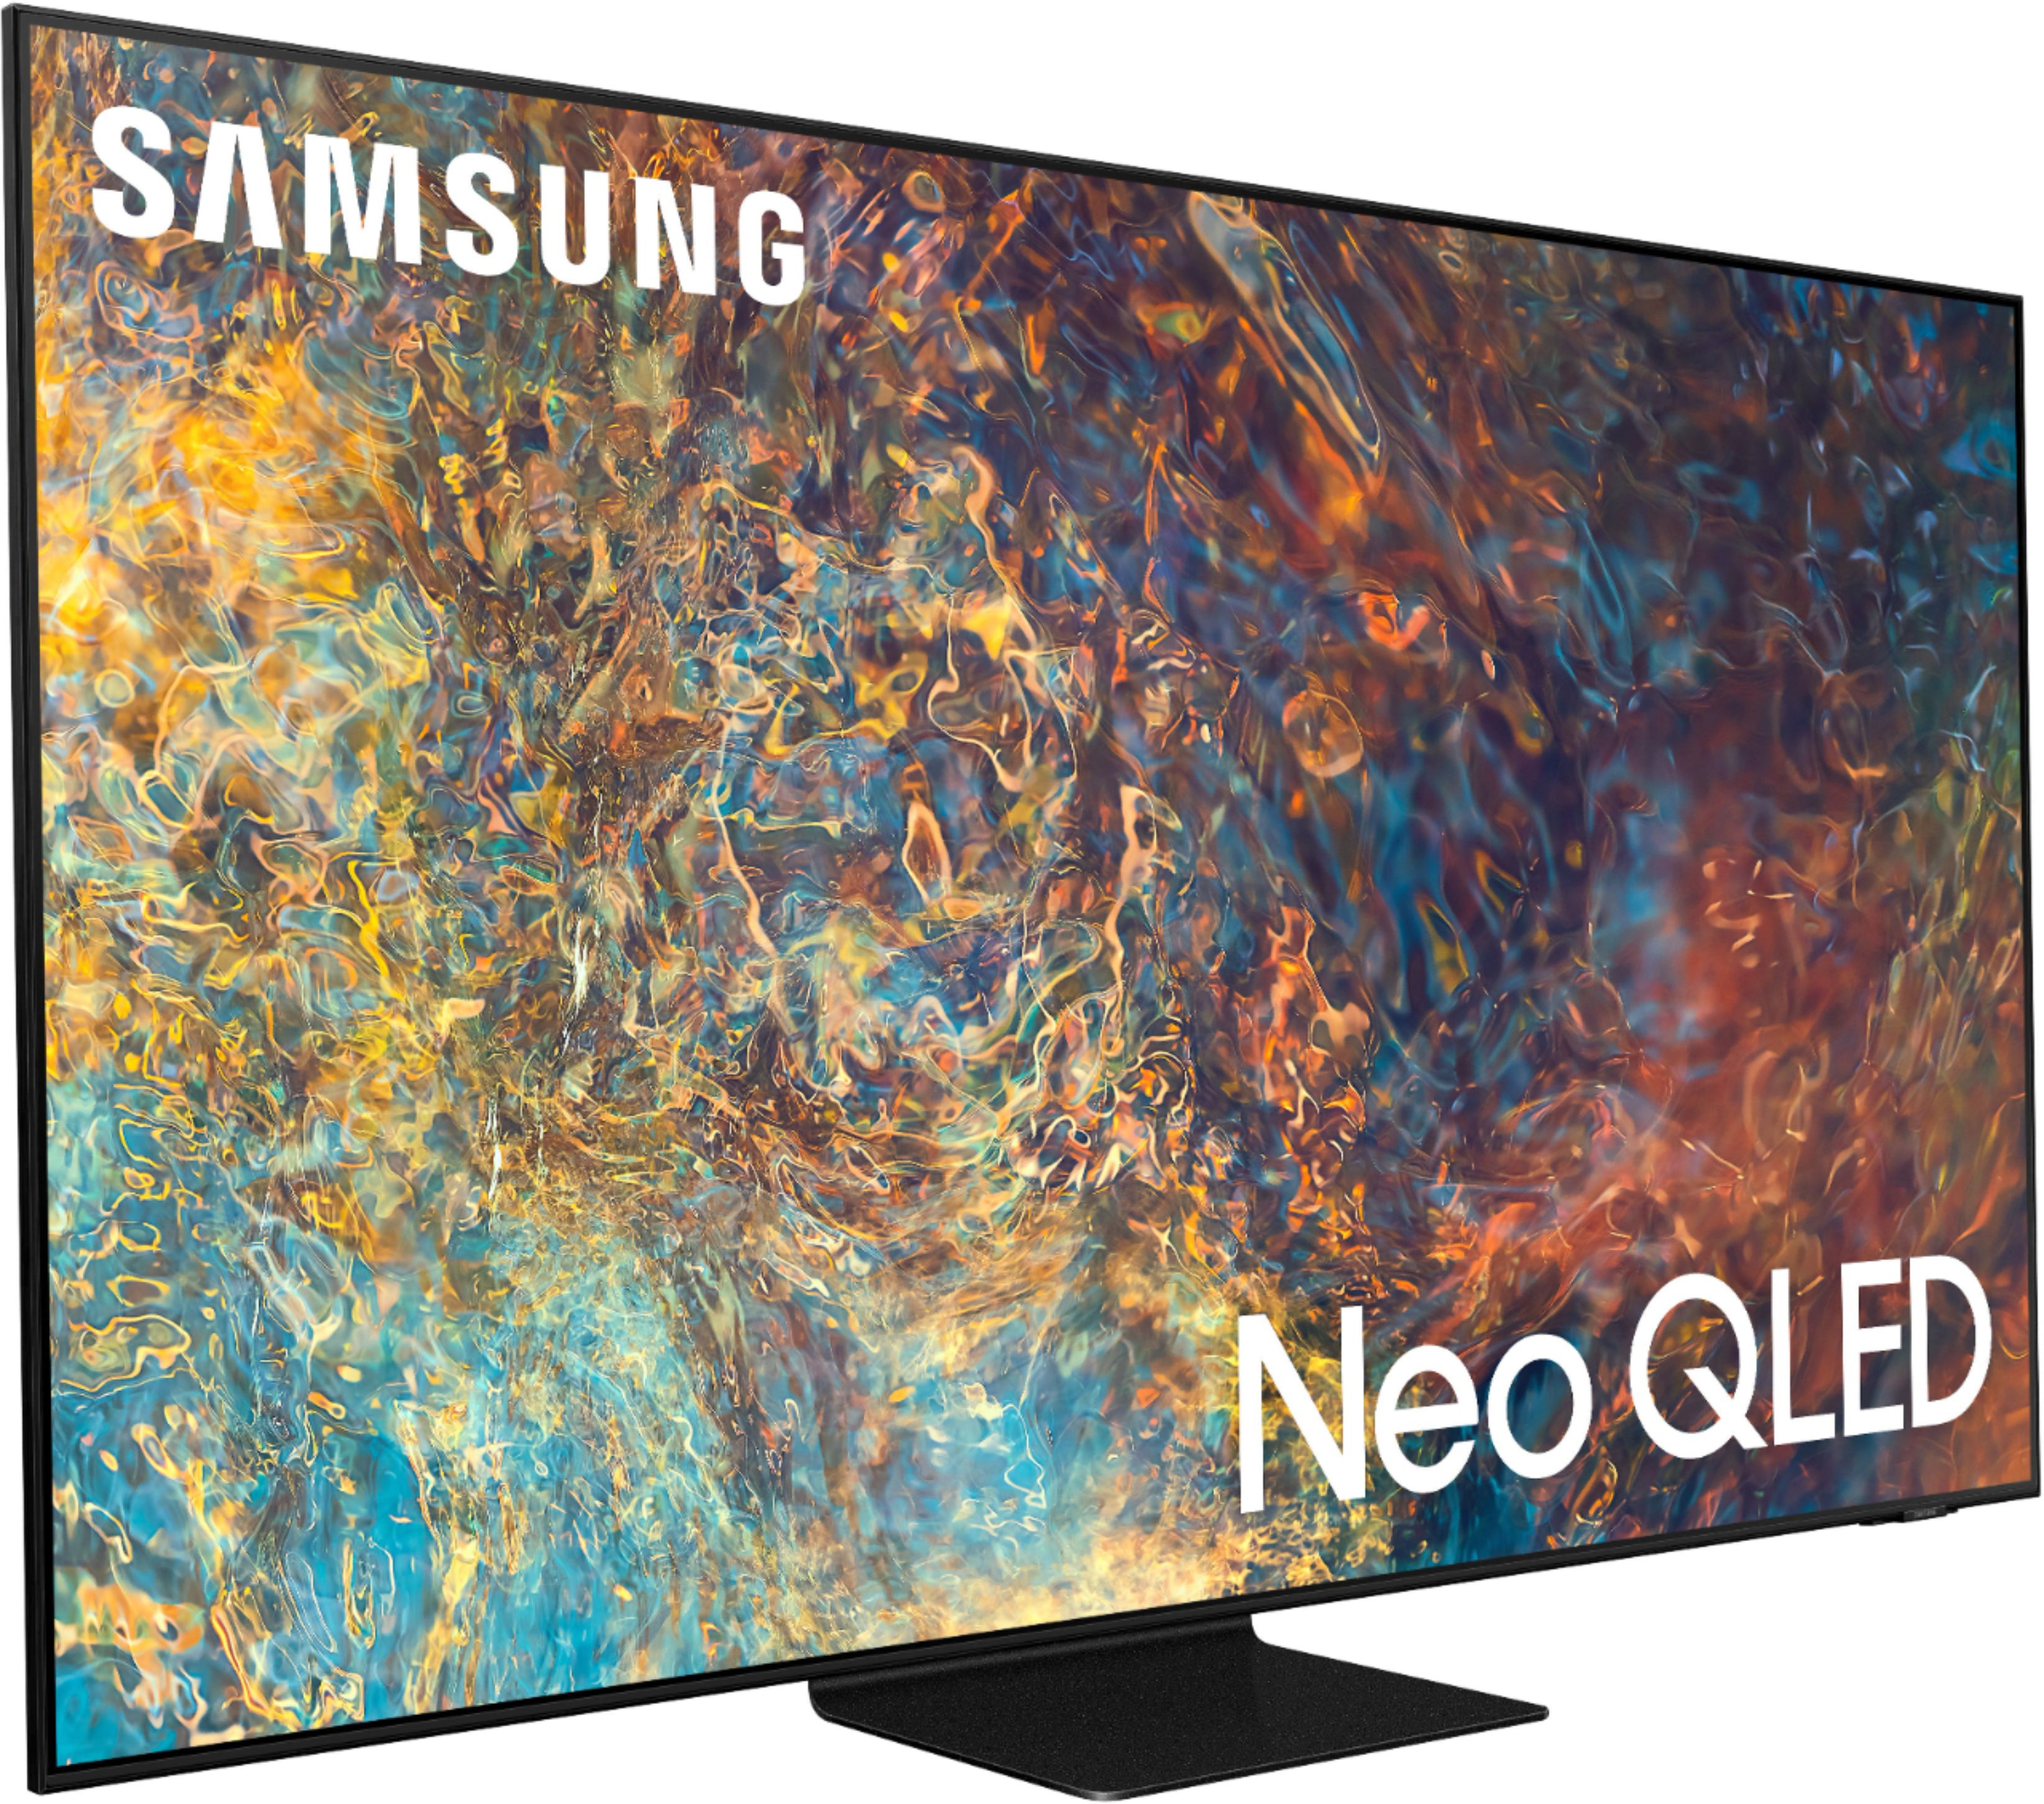 What is Neo Qled Samsung Tv? 